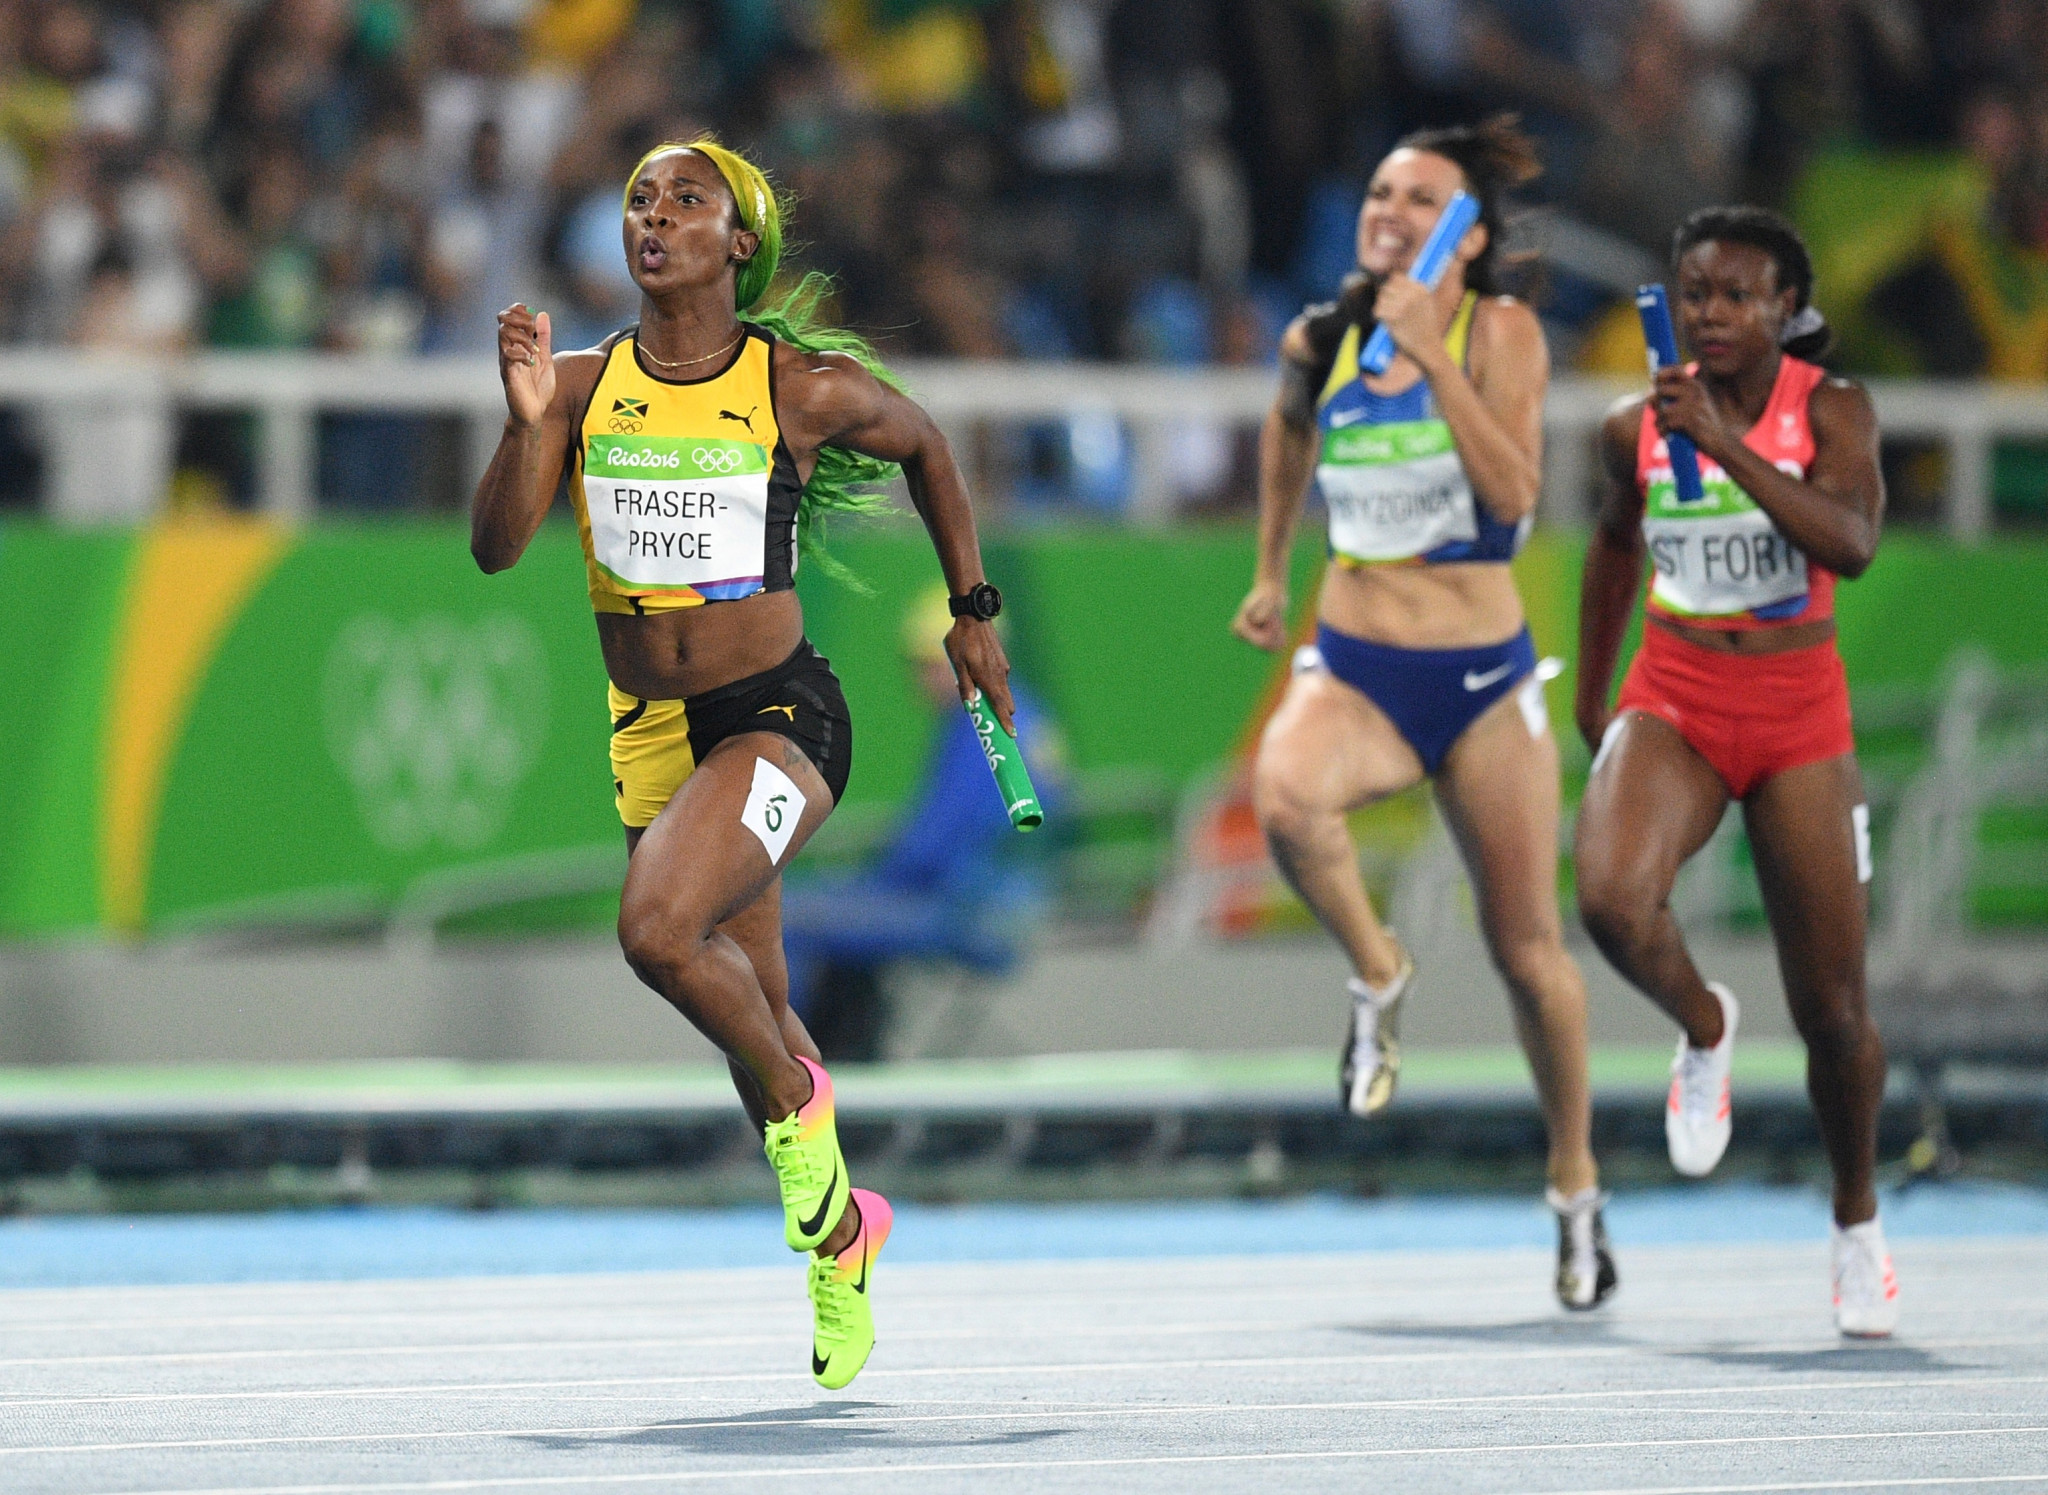 Seven-time world gold medallist Shelly-Ann Fraser-Pryce is the captain of the Jamaica team ©Getty Images